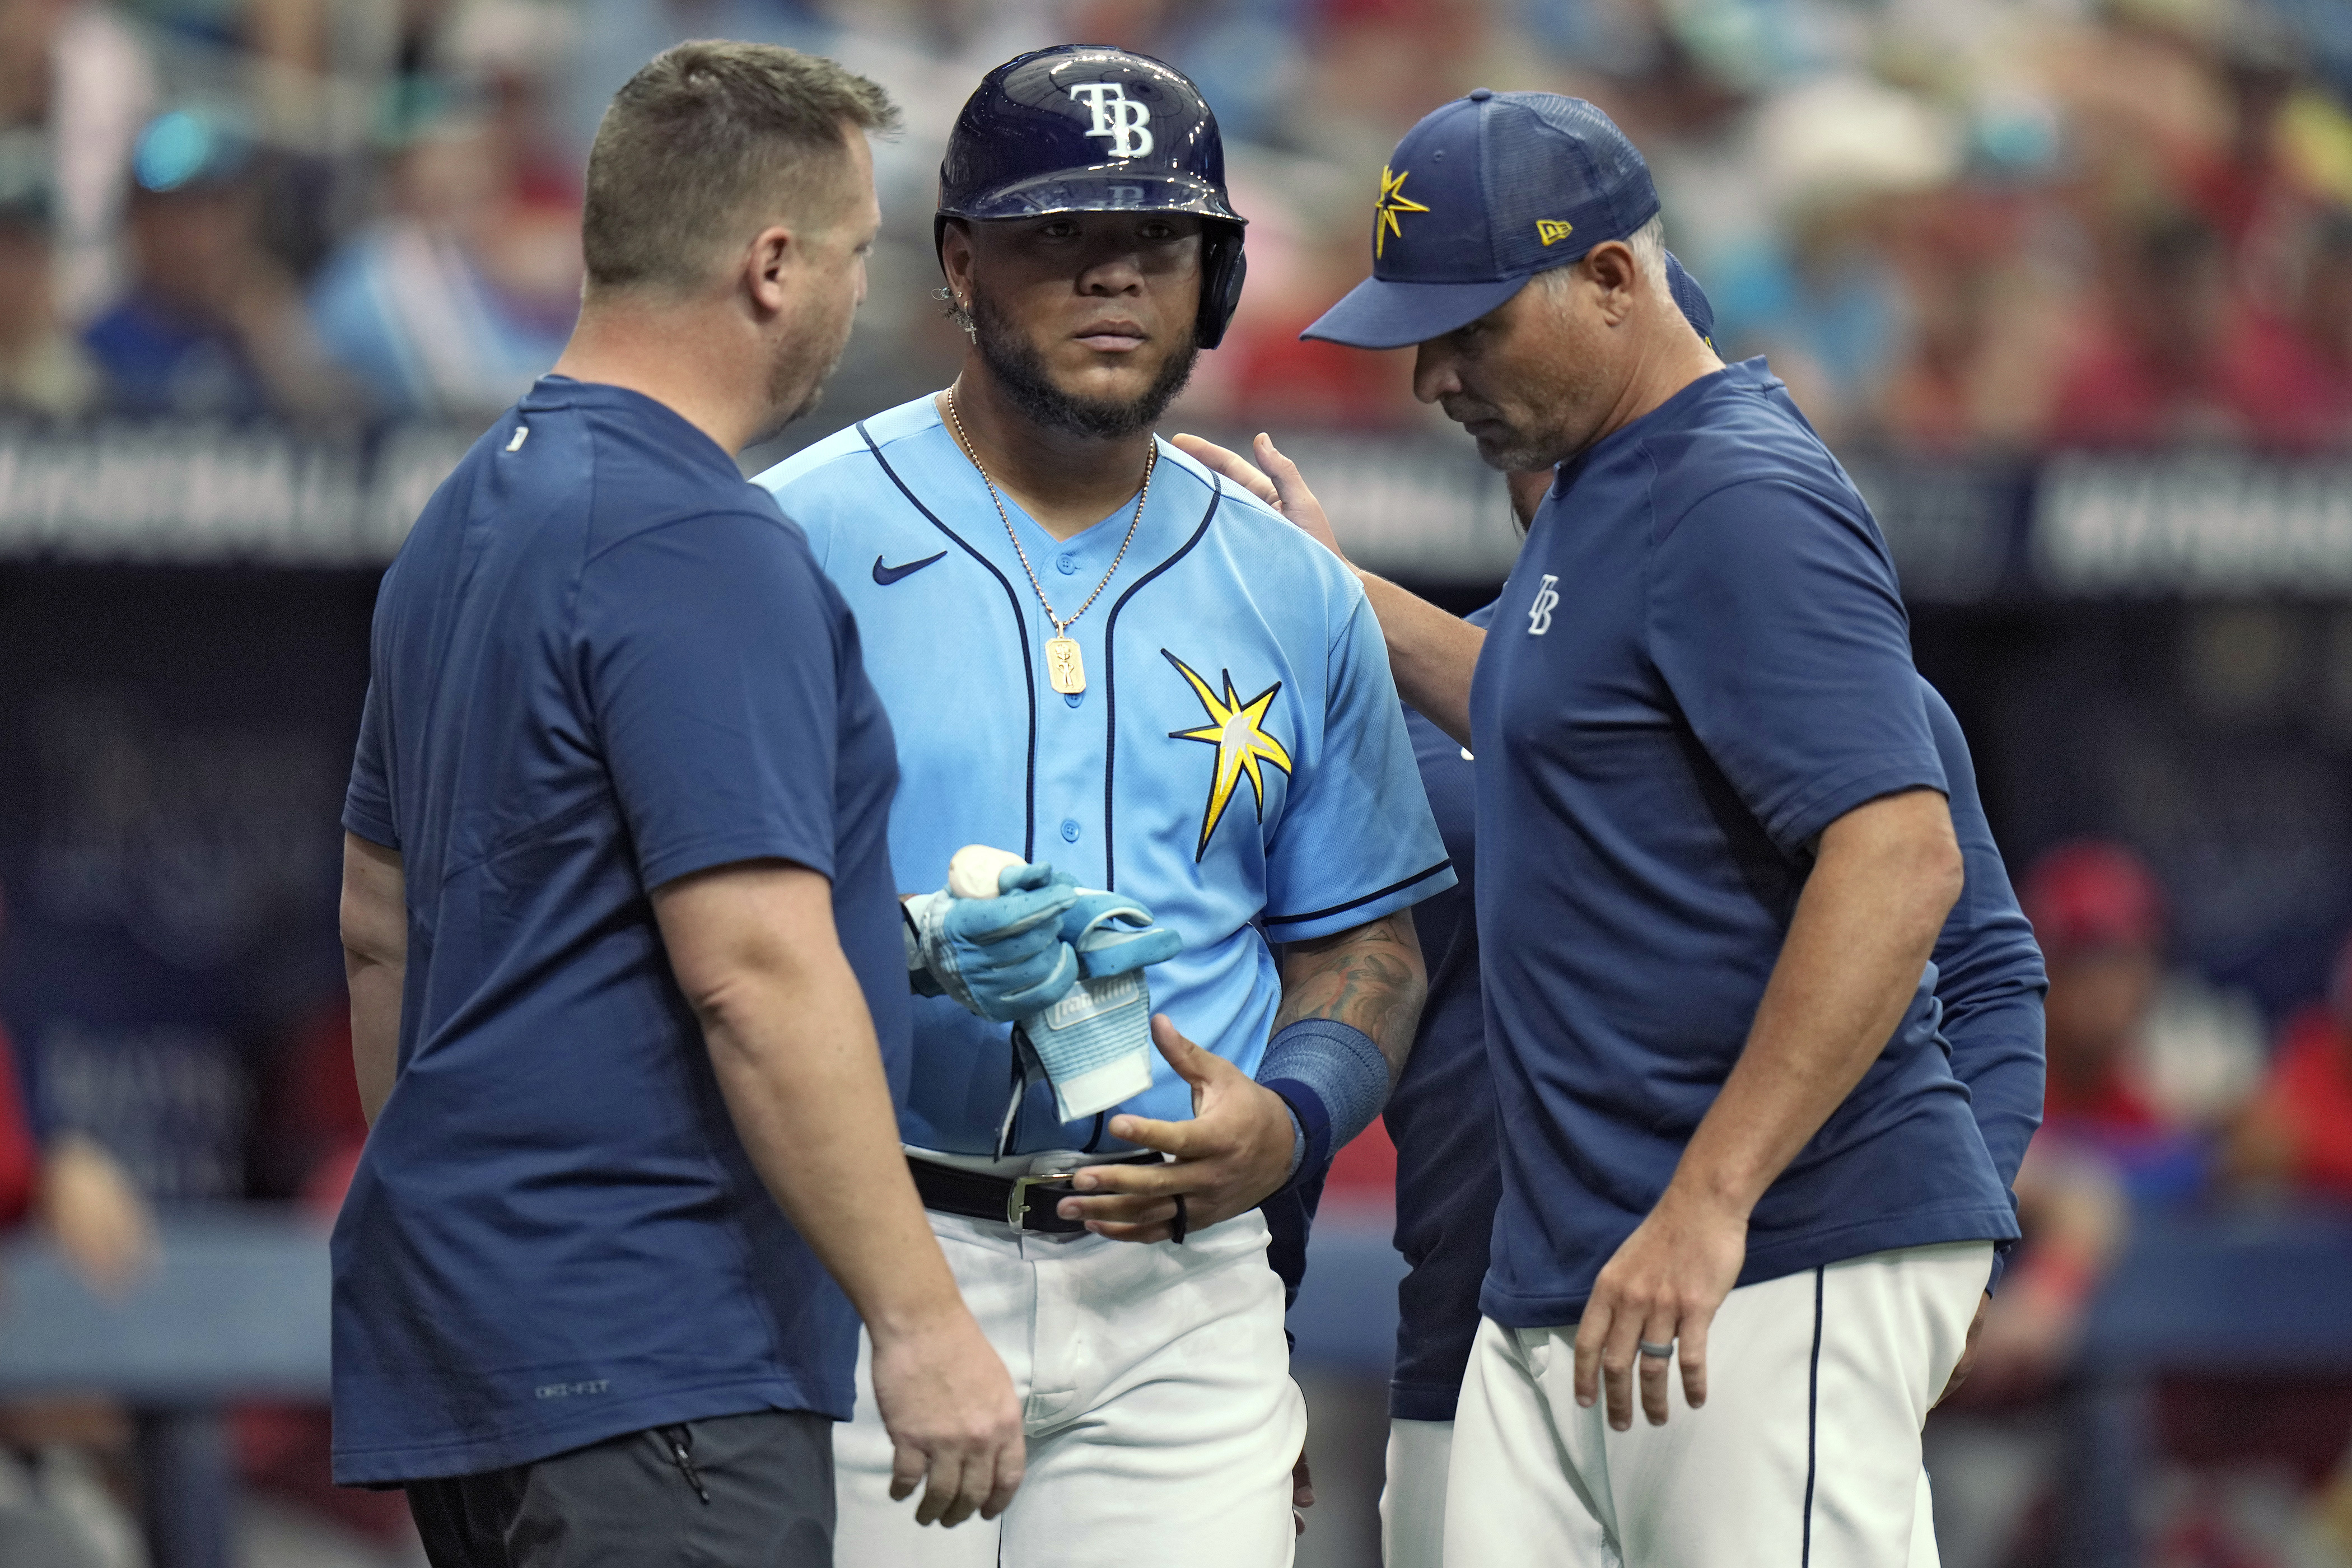 Rays' Harold Ramirez hopes to find more power as he makes himself at home